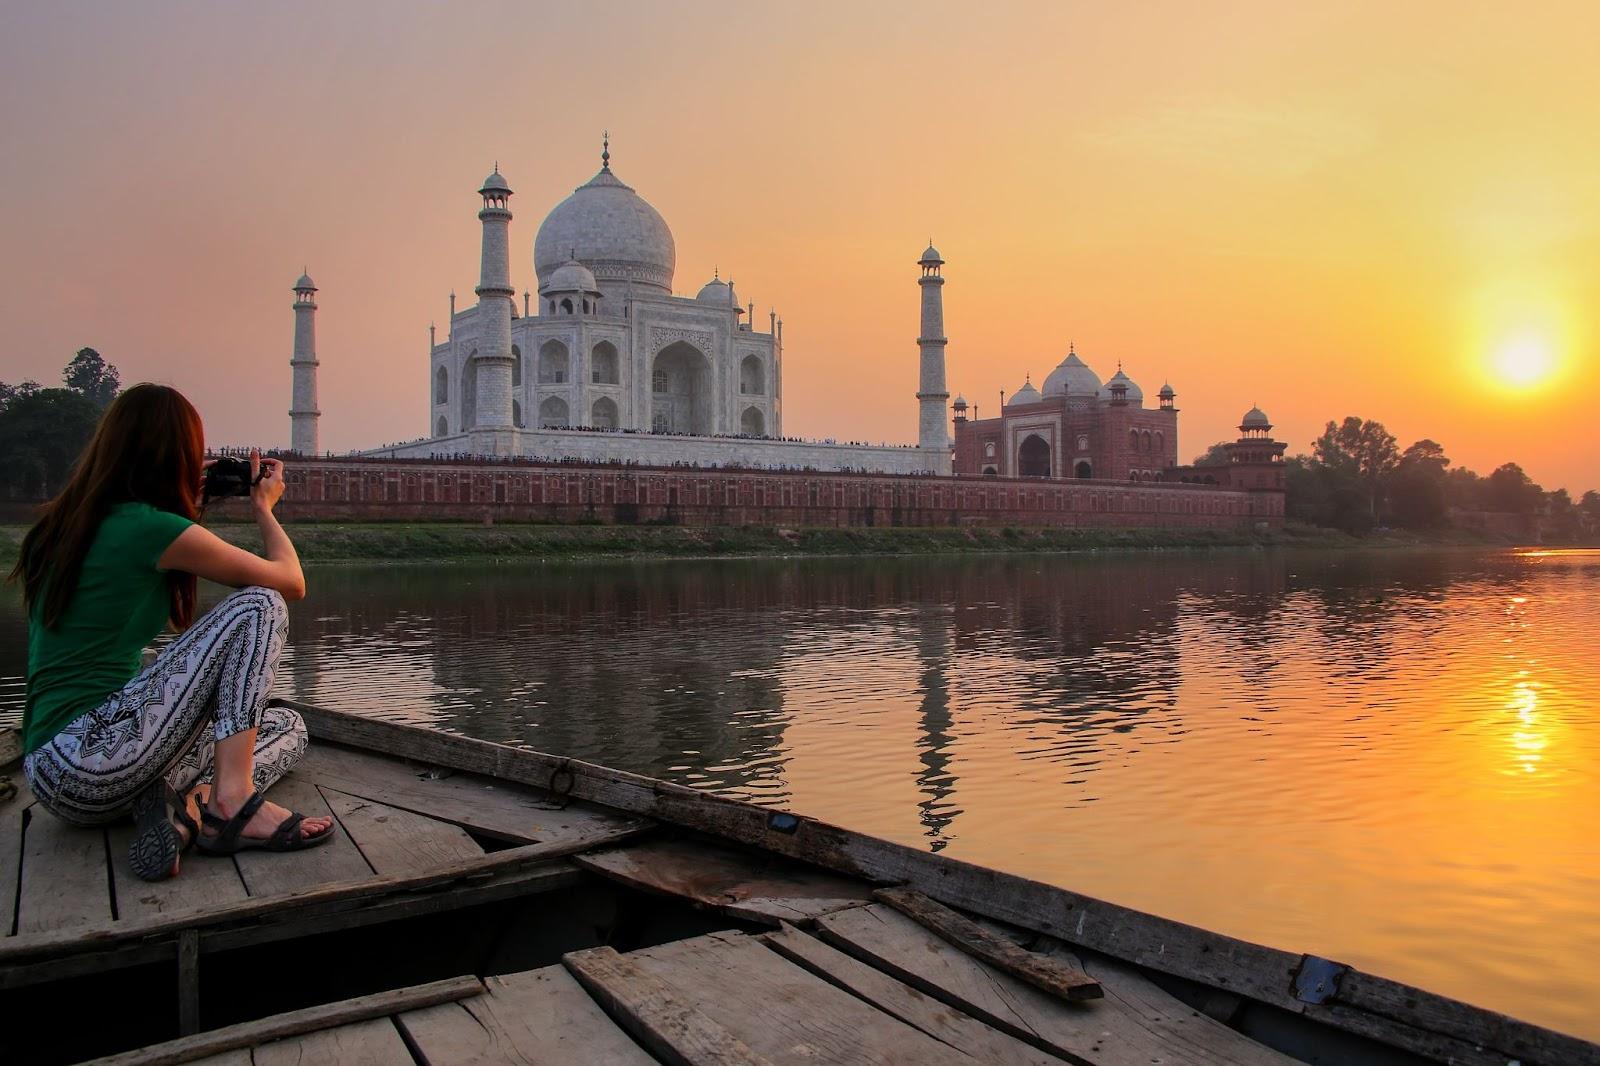 Woman watching sunset over Taj Mahal from a boat, Agra, India.